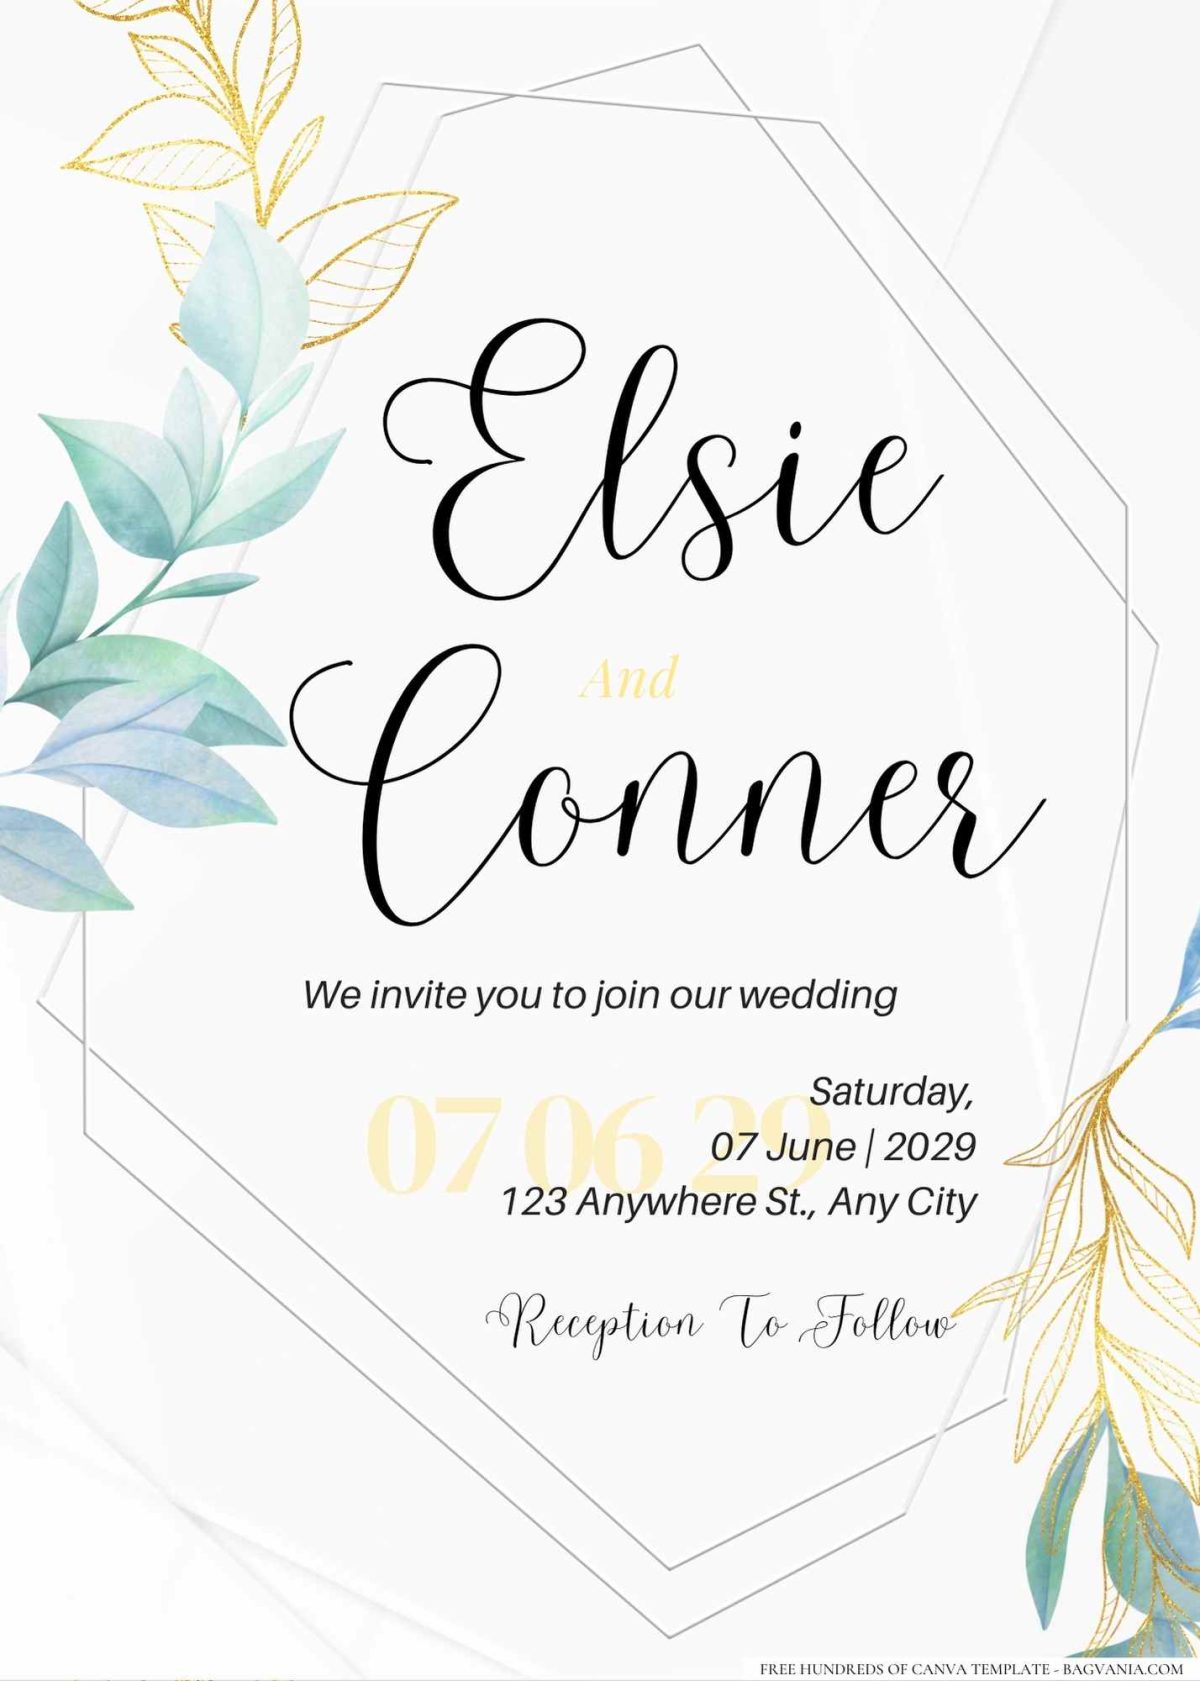 FREE Editable Floral patterns combined with geometric shapes wedding invitations